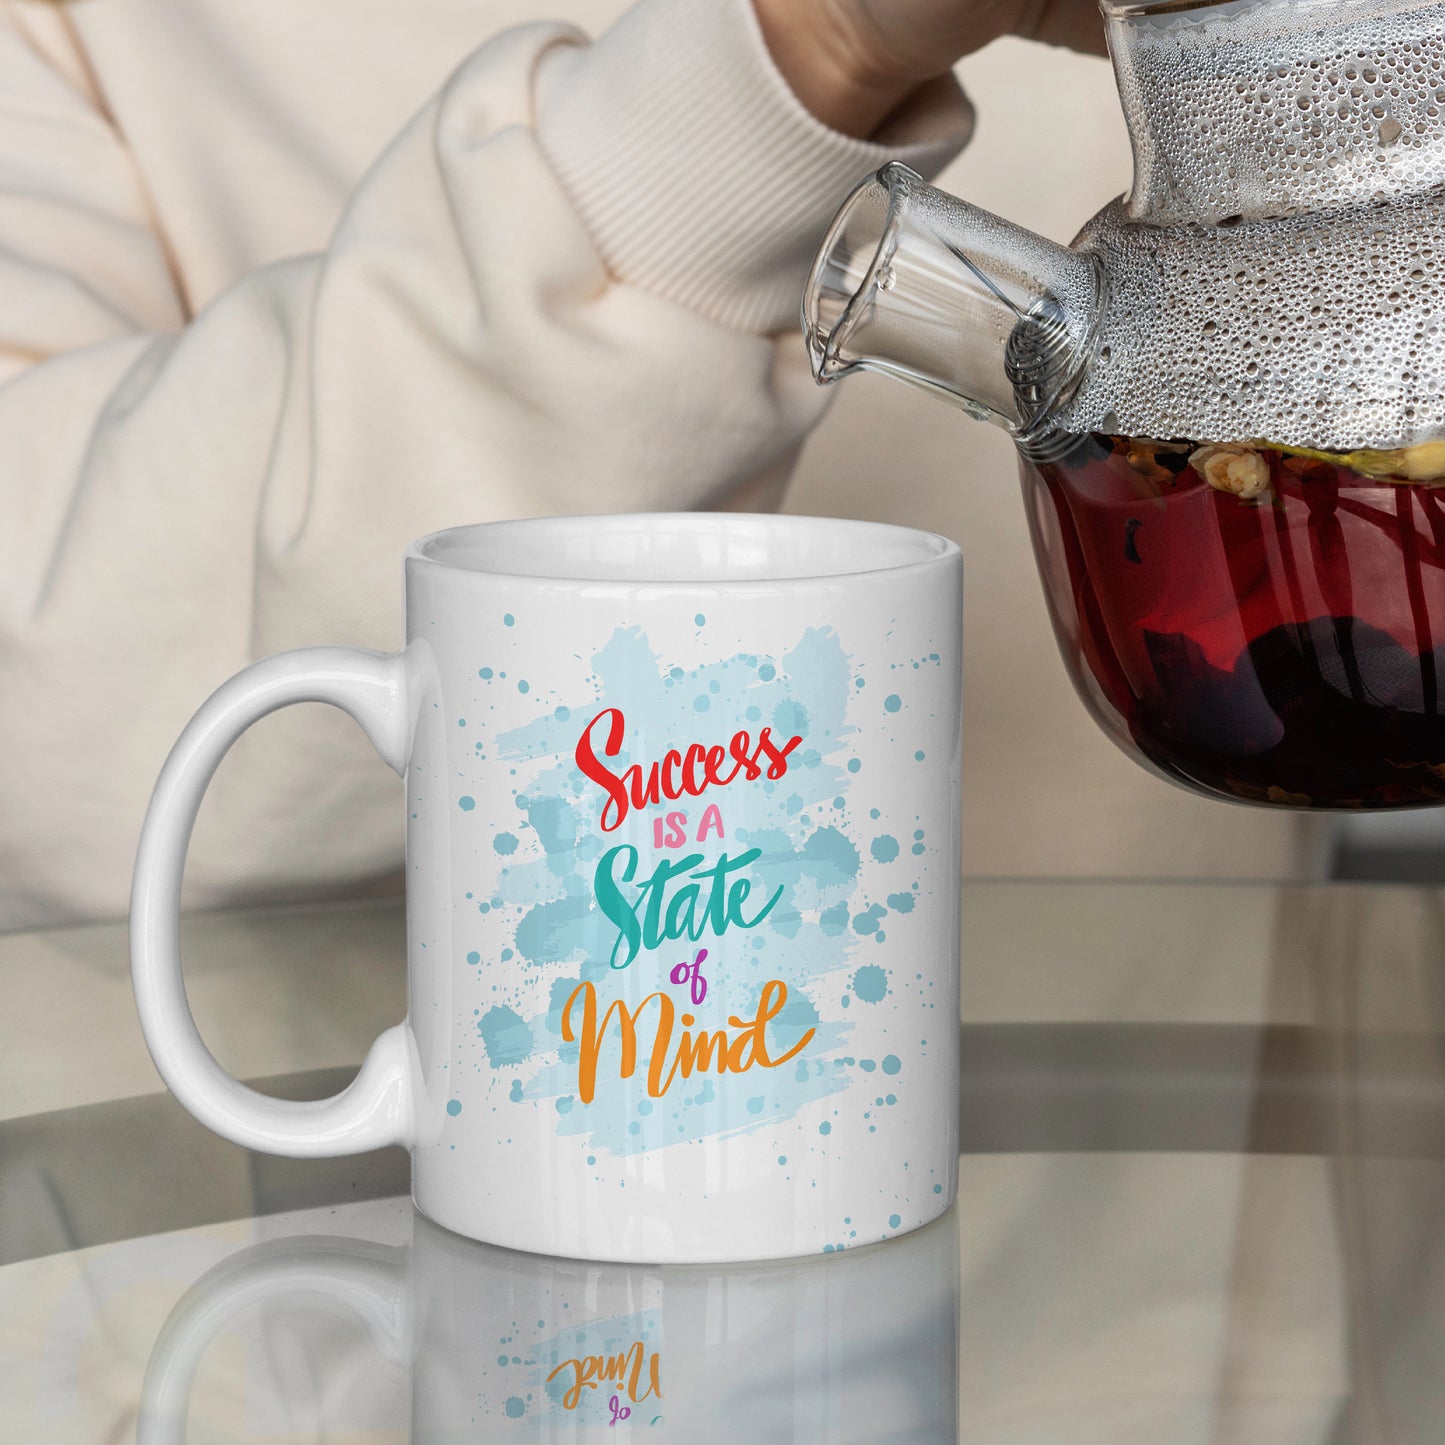 Personalized Mug (Success Is A State of Mind )